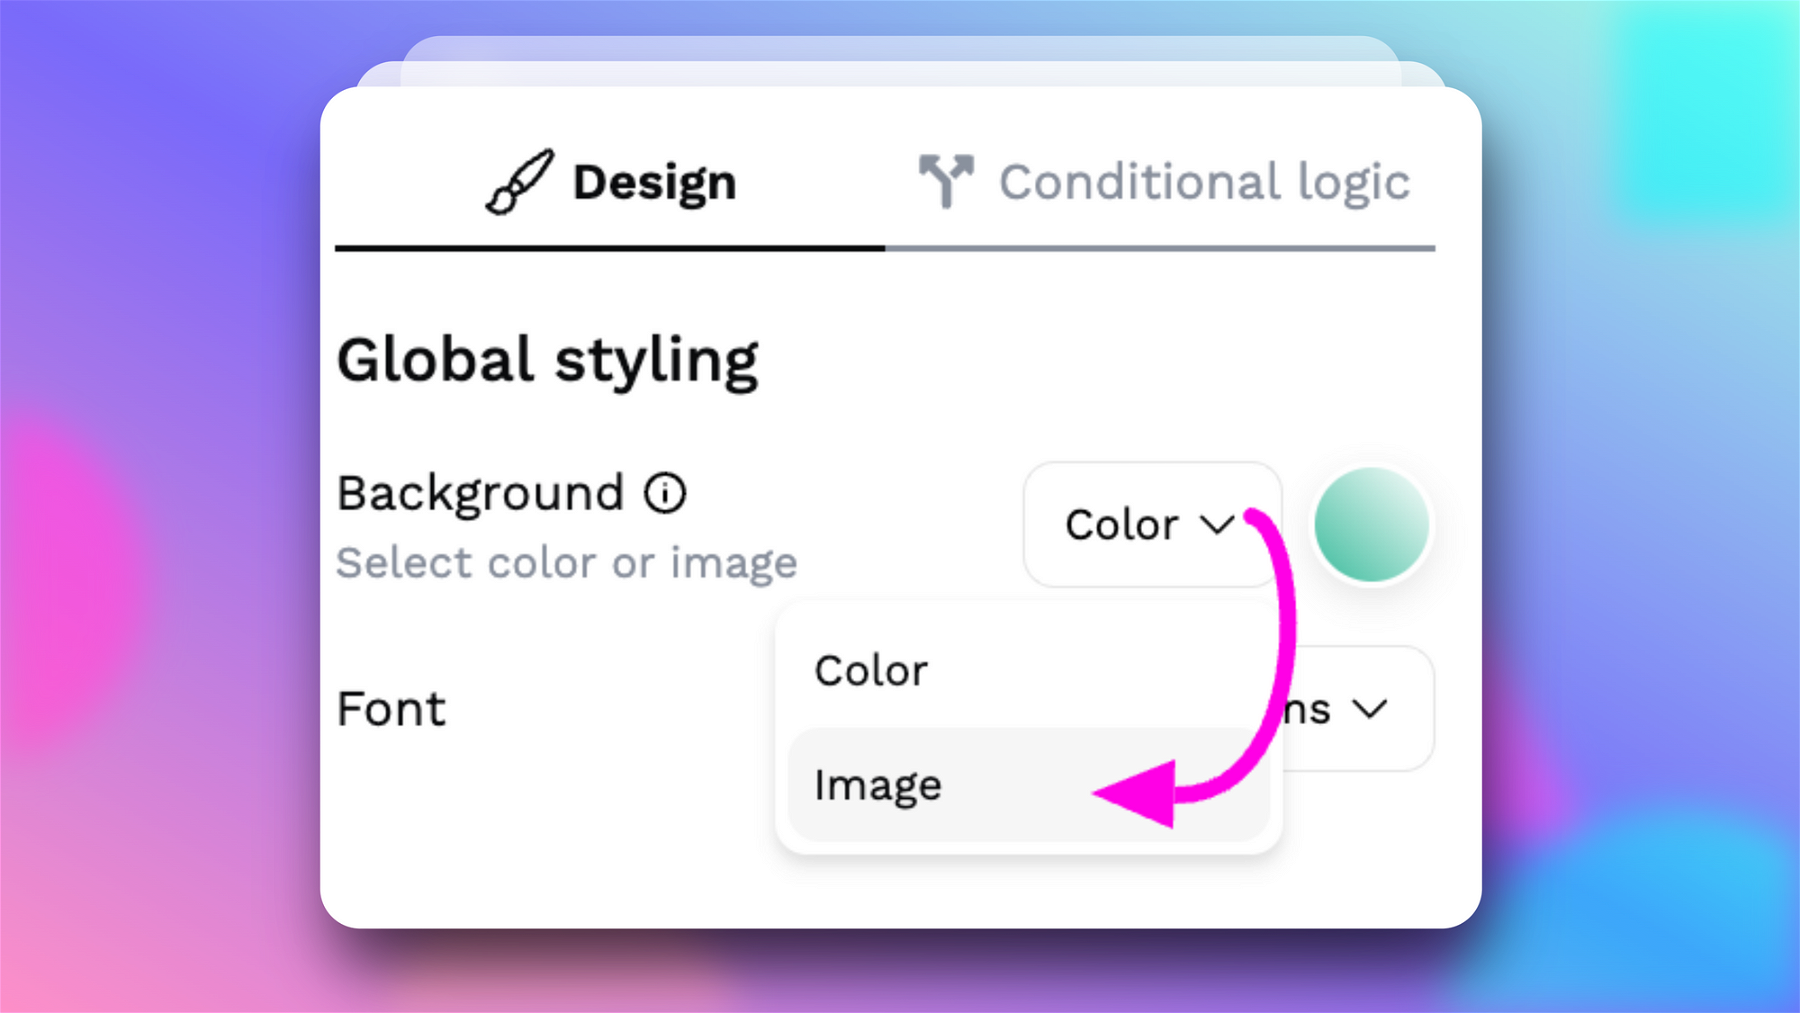 Example screenshot showing where the background image option is. Click the dropdown menu next to the background styling area, then select Image to upload your own!